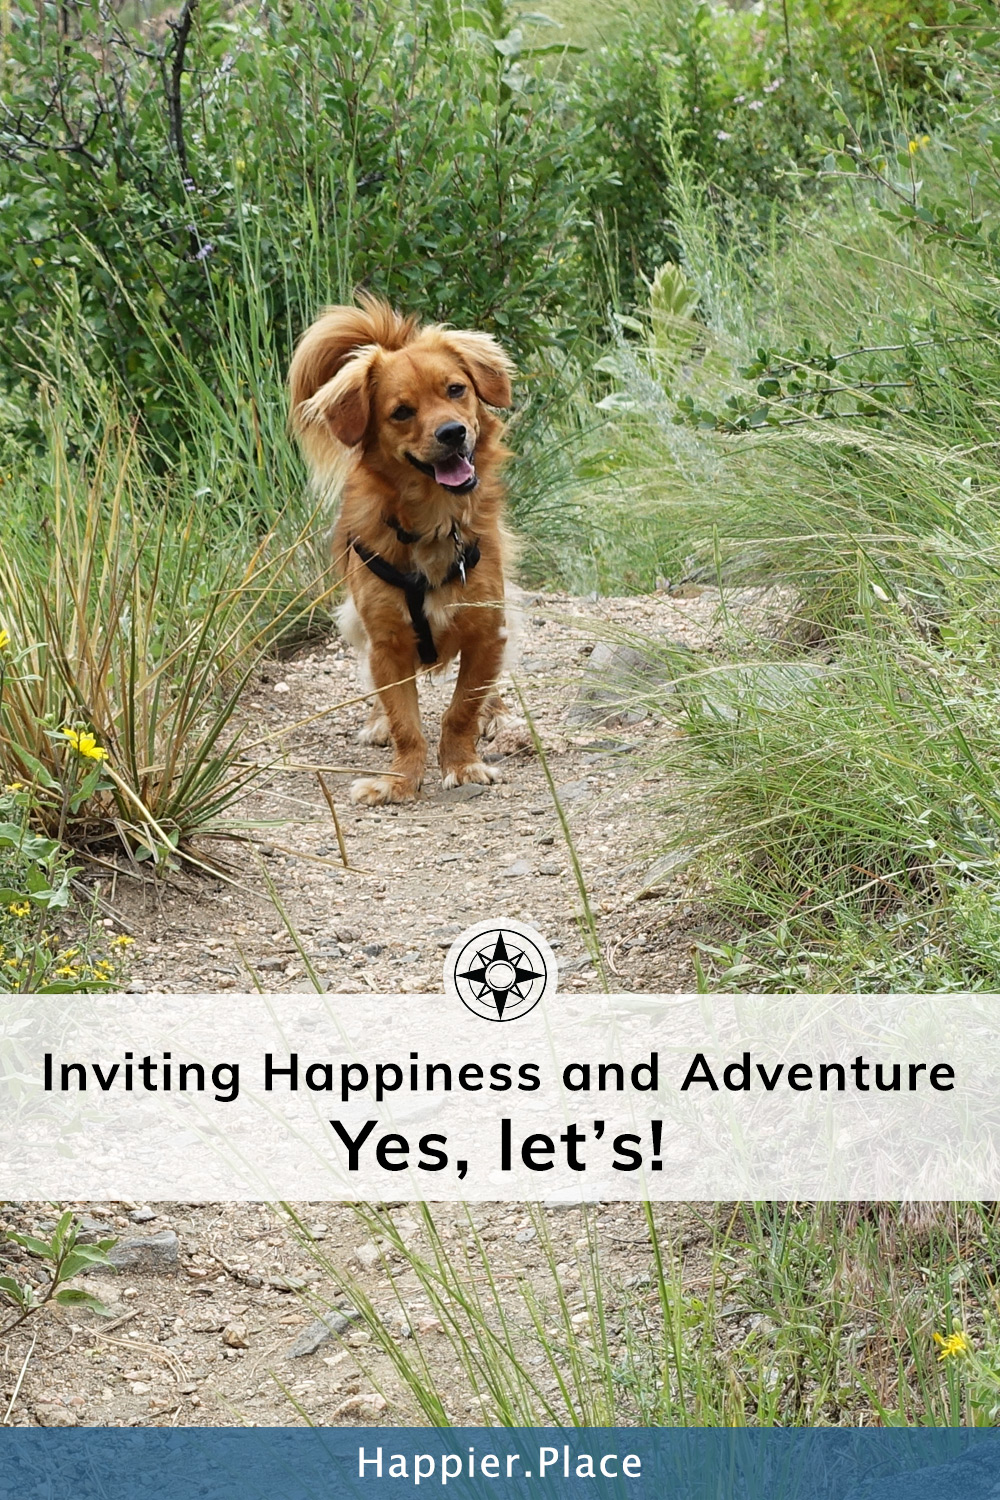 dog hike trail happiness yes let's